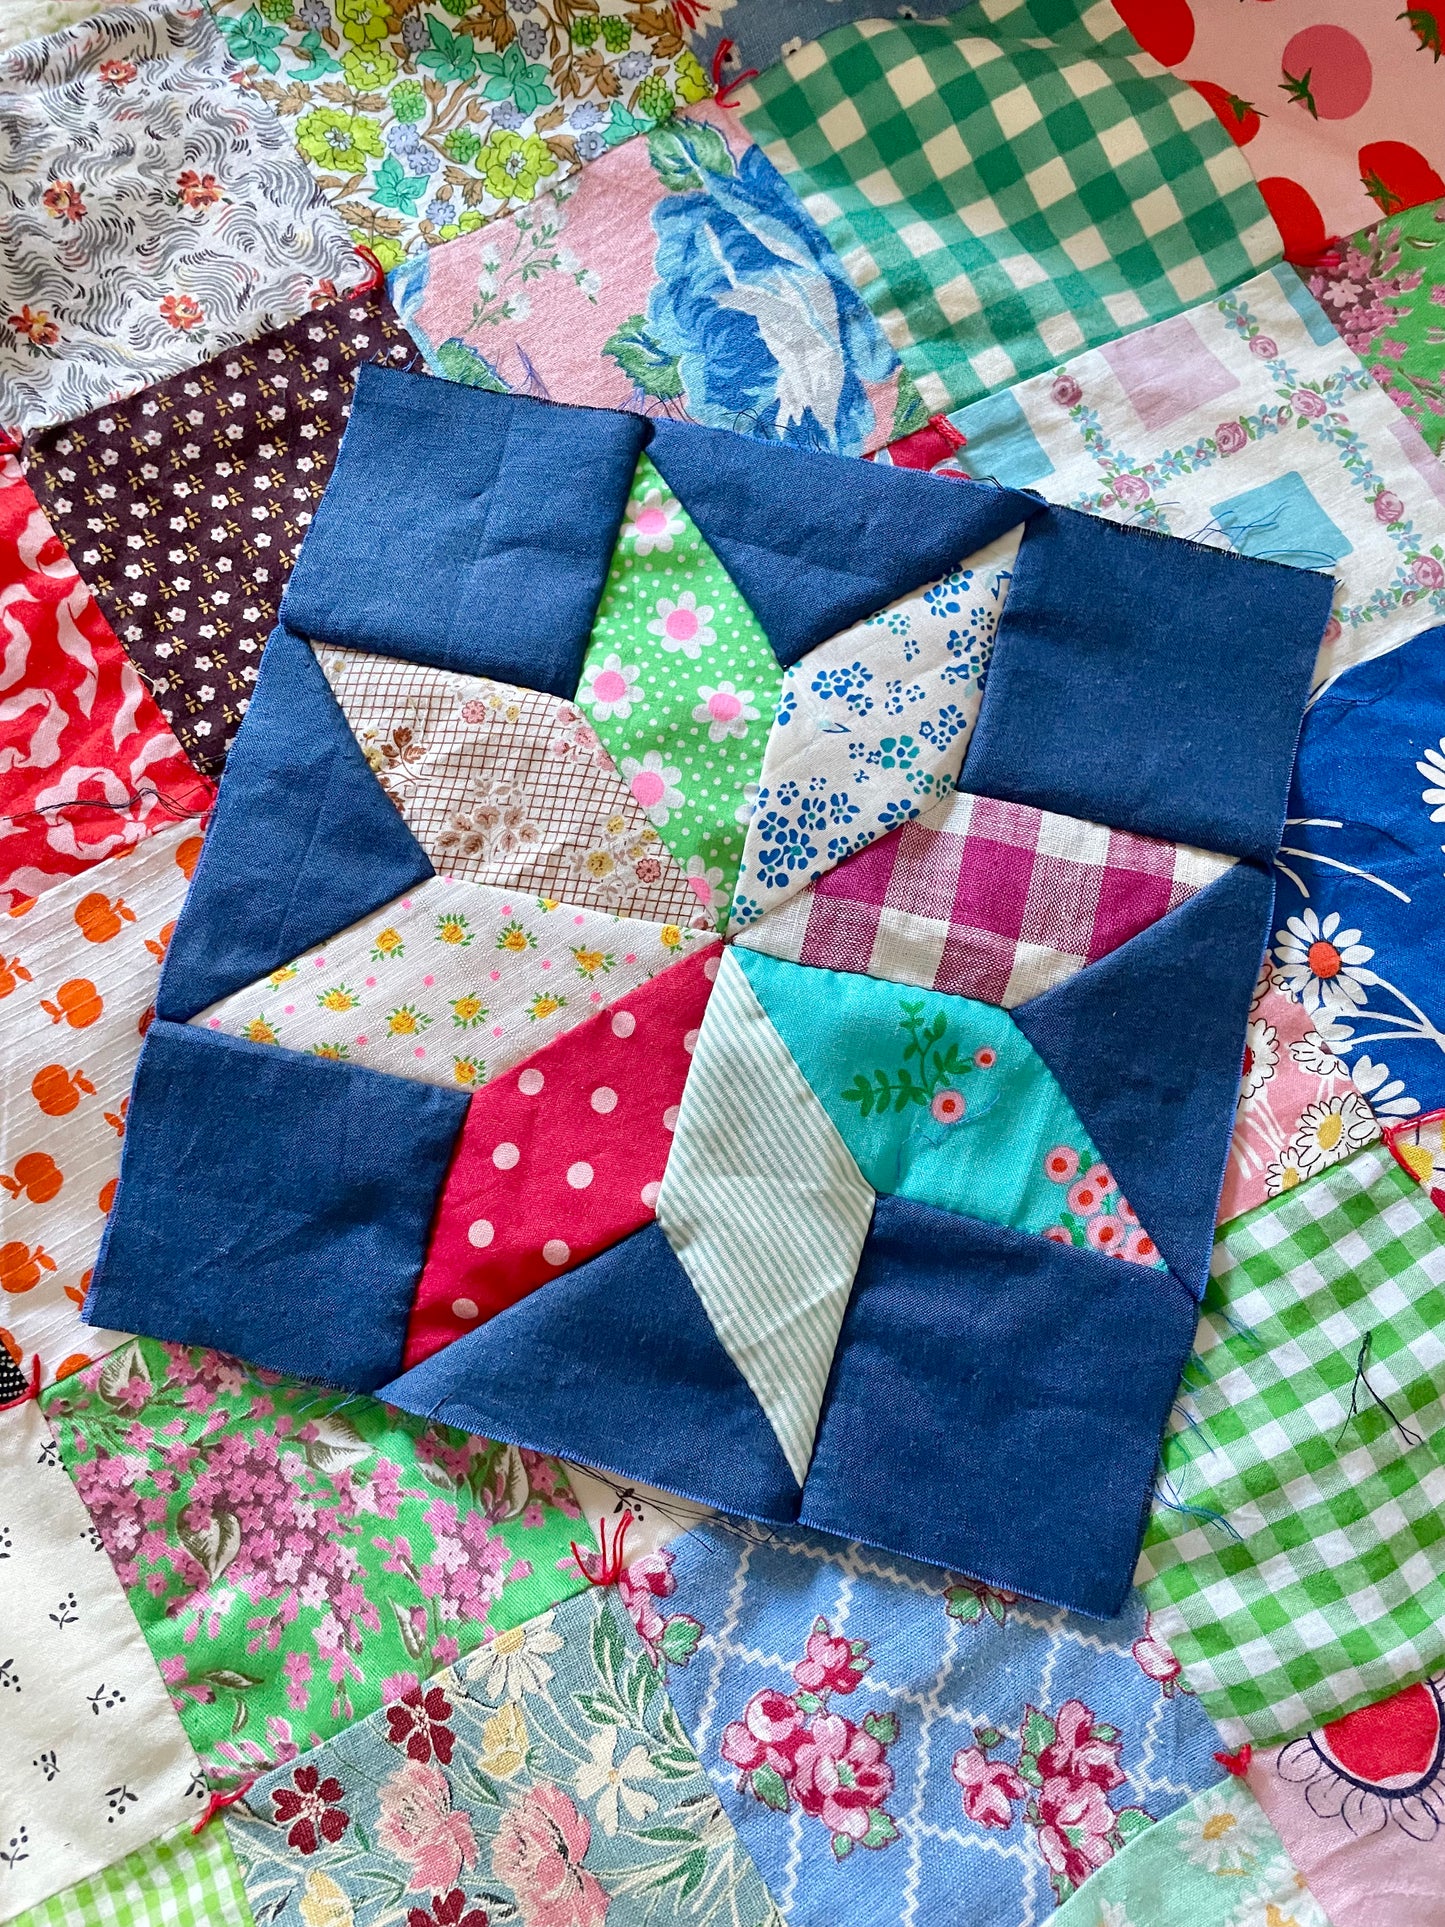 Hand Piecing, Needle Turn Appliqué and Hand Quilting Class 10.30 - 1.30 Friday 1st September